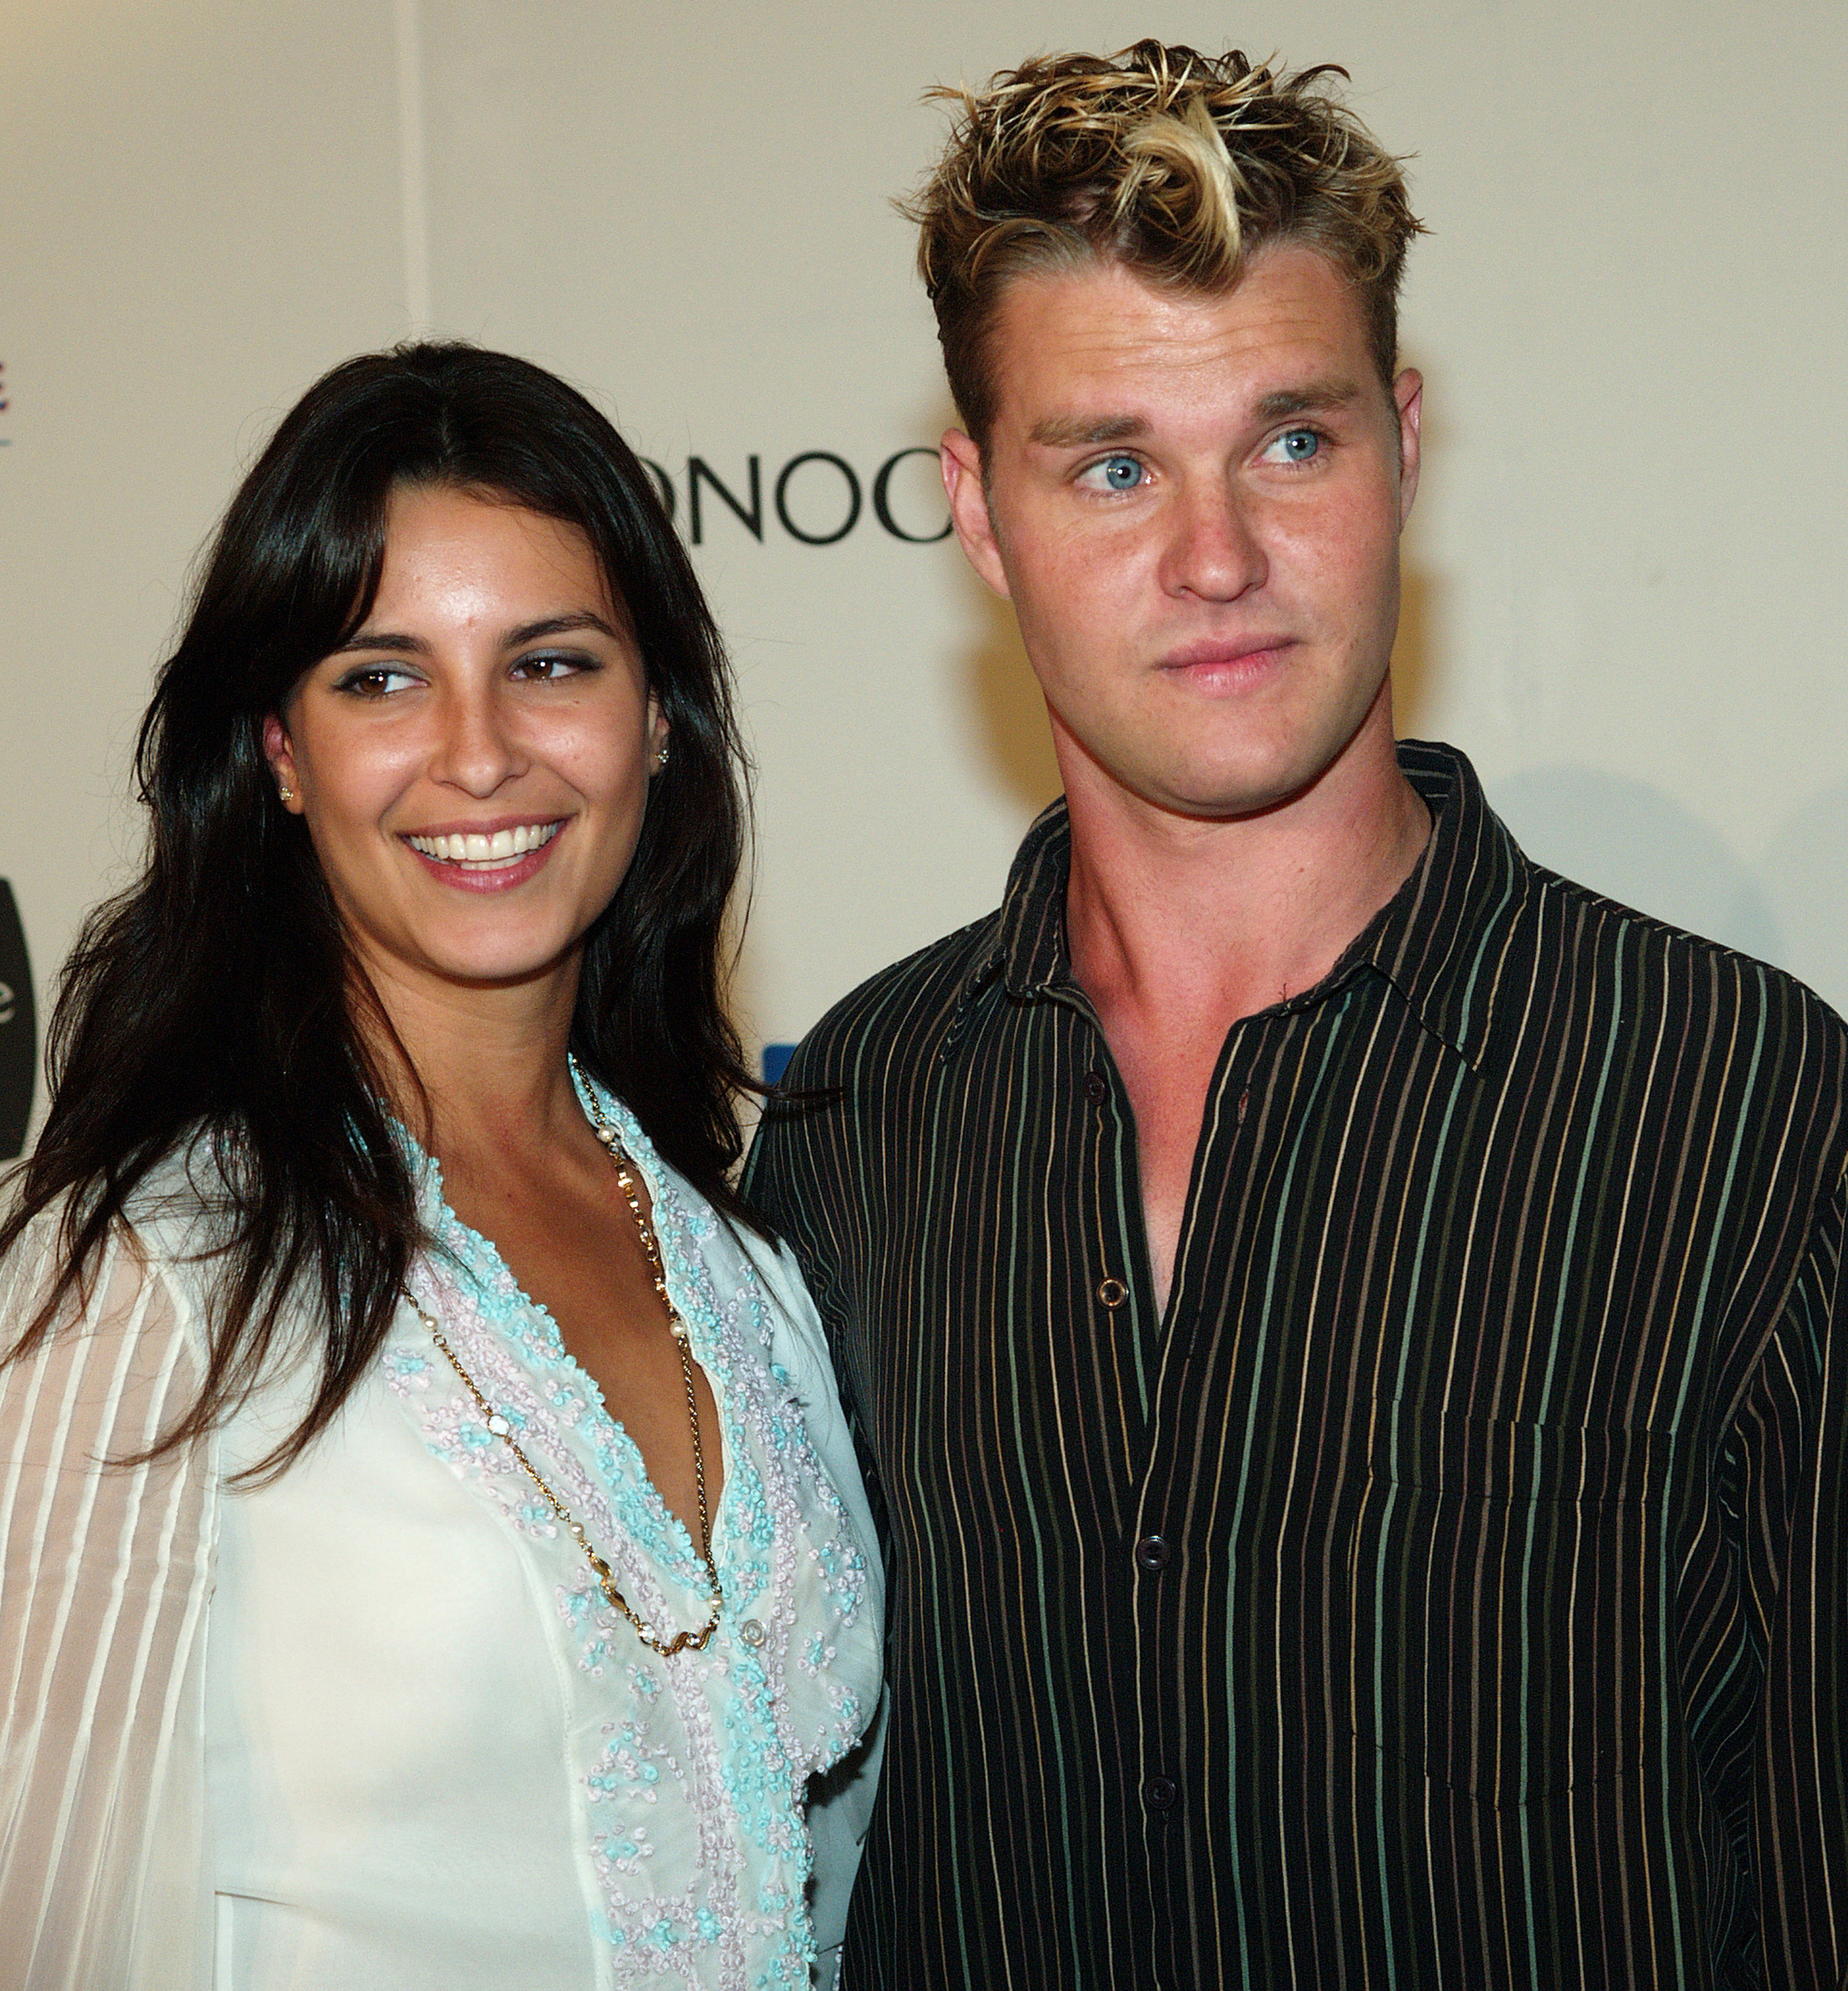 Zachery Ty Bryan with Carly Matros in Santa Monica, California | Source: Getty Images